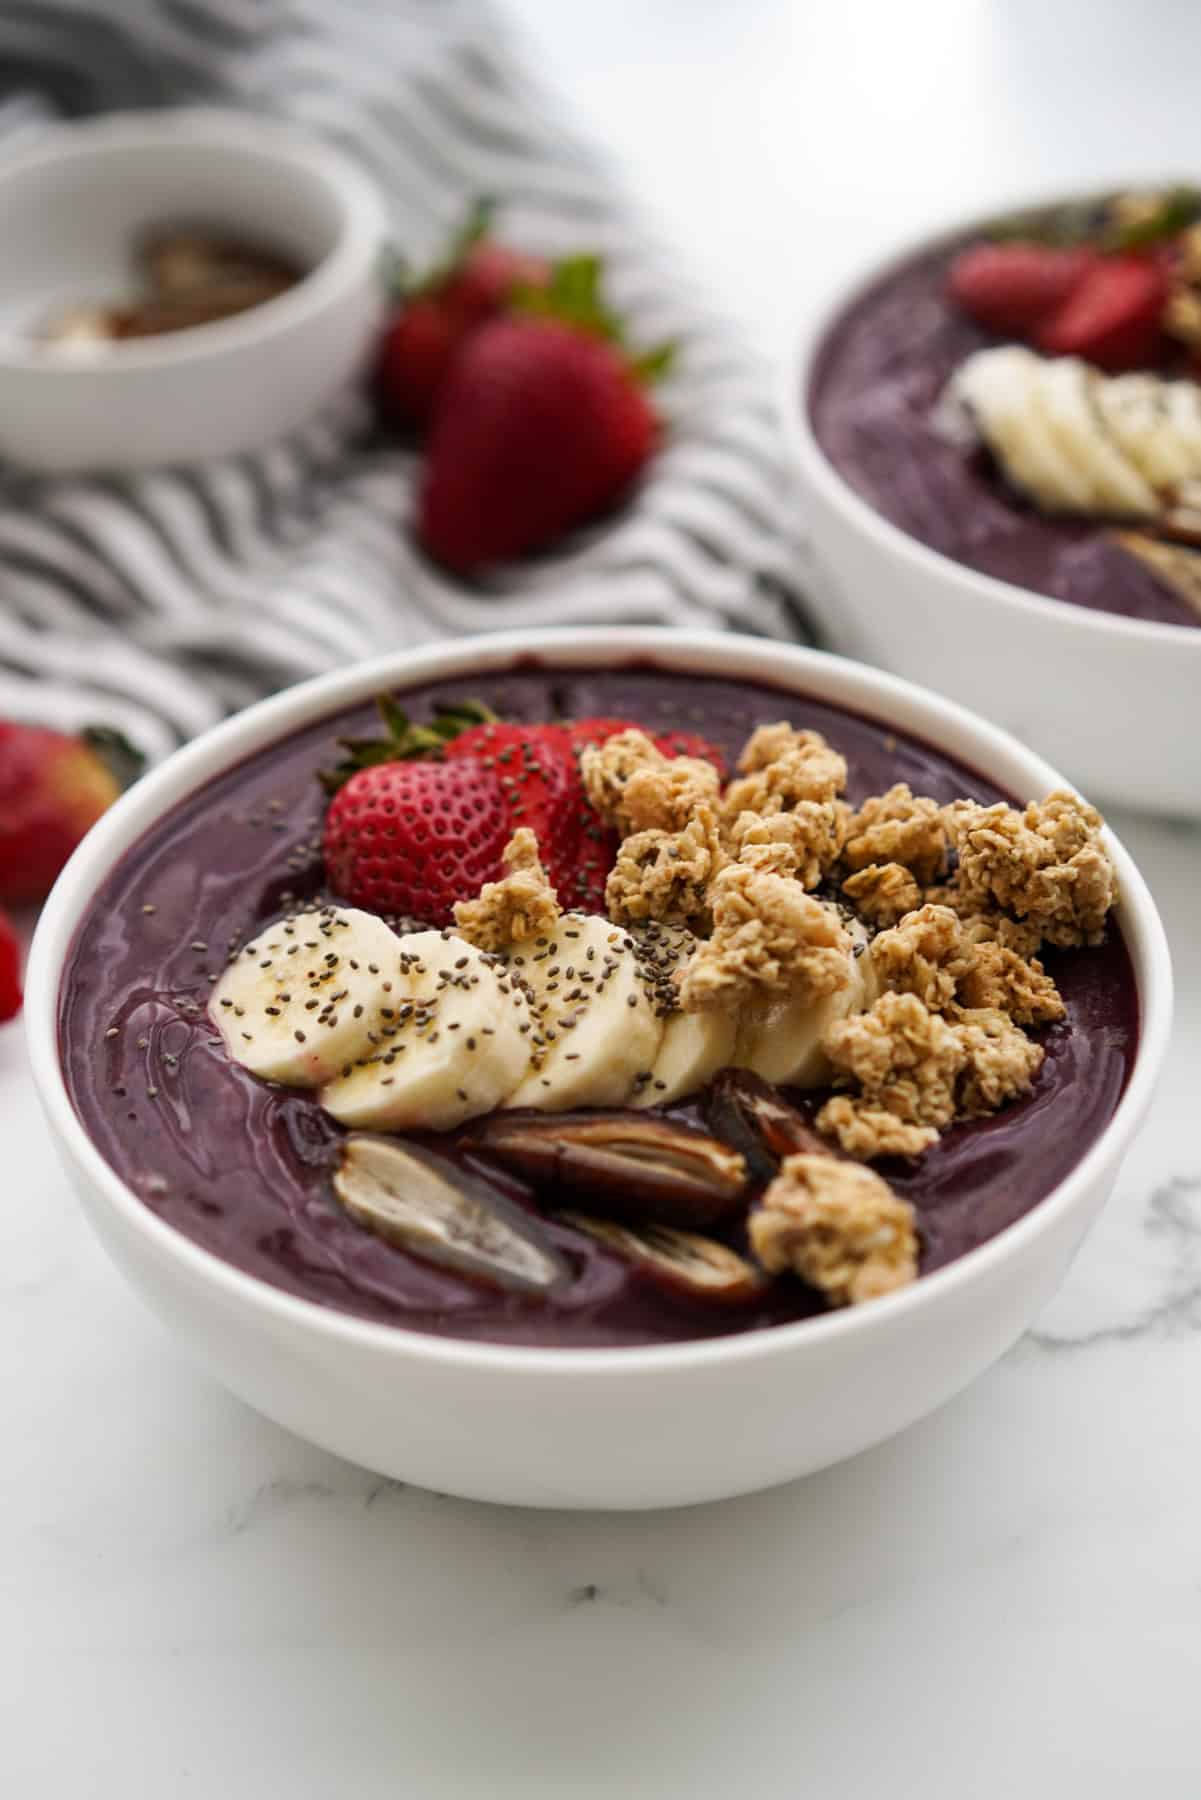 Frozen acai smoothie bowl topped with bananas, dates, granola and strawberries